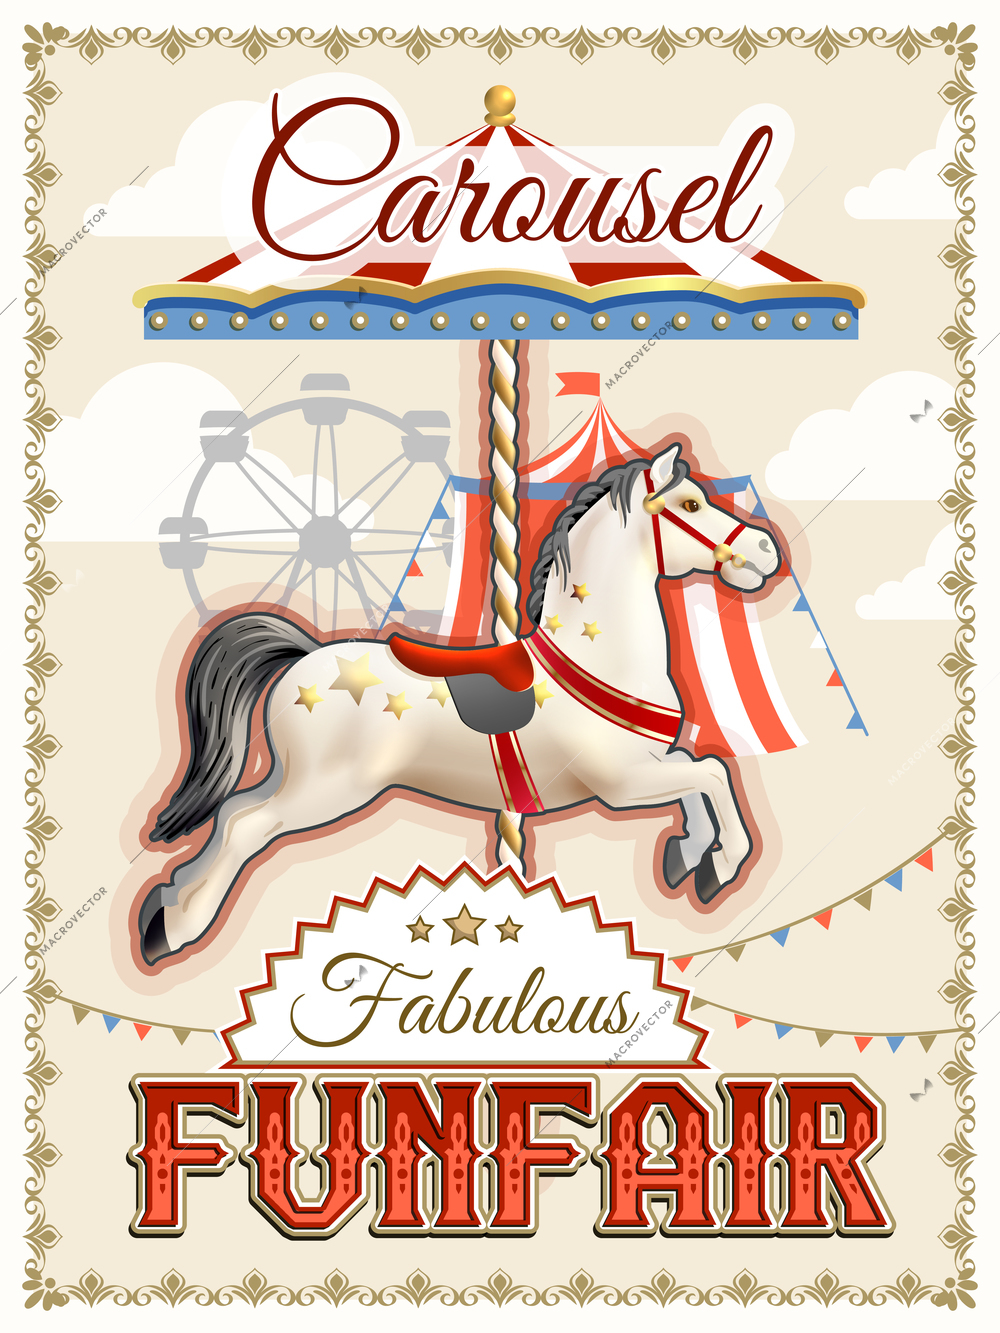 Retro funfair or amusement park poster with carousel horse vector illustration